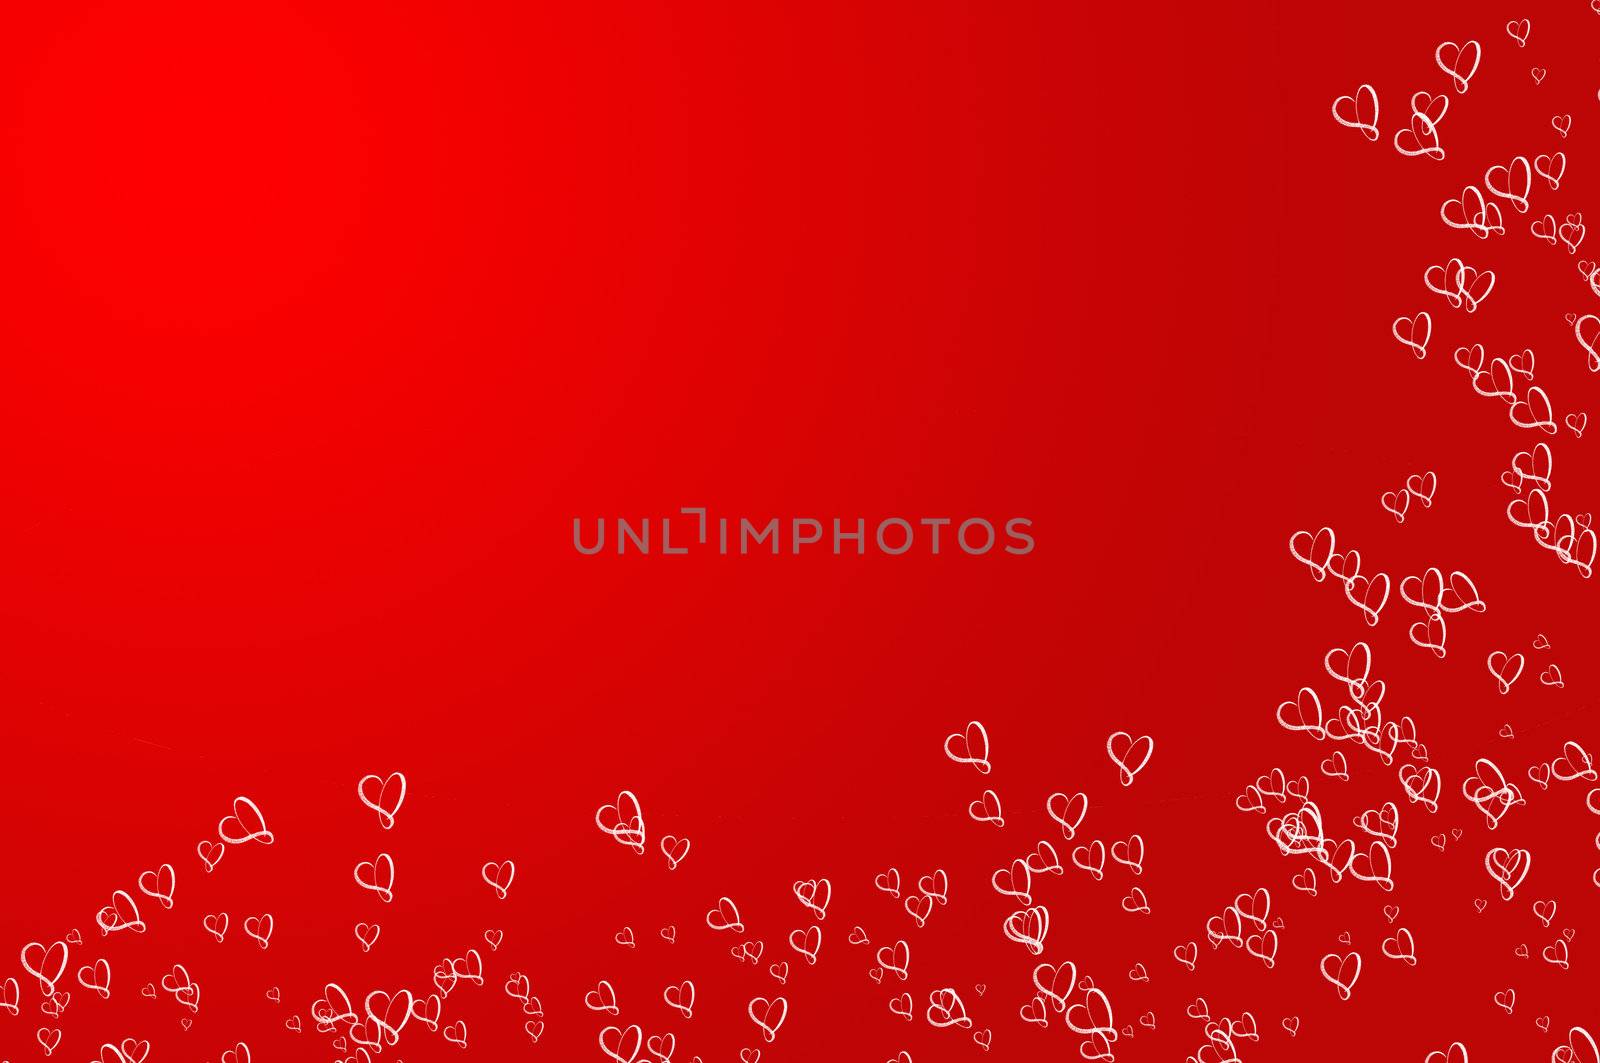 Valentines Day background frame, red with Hearts